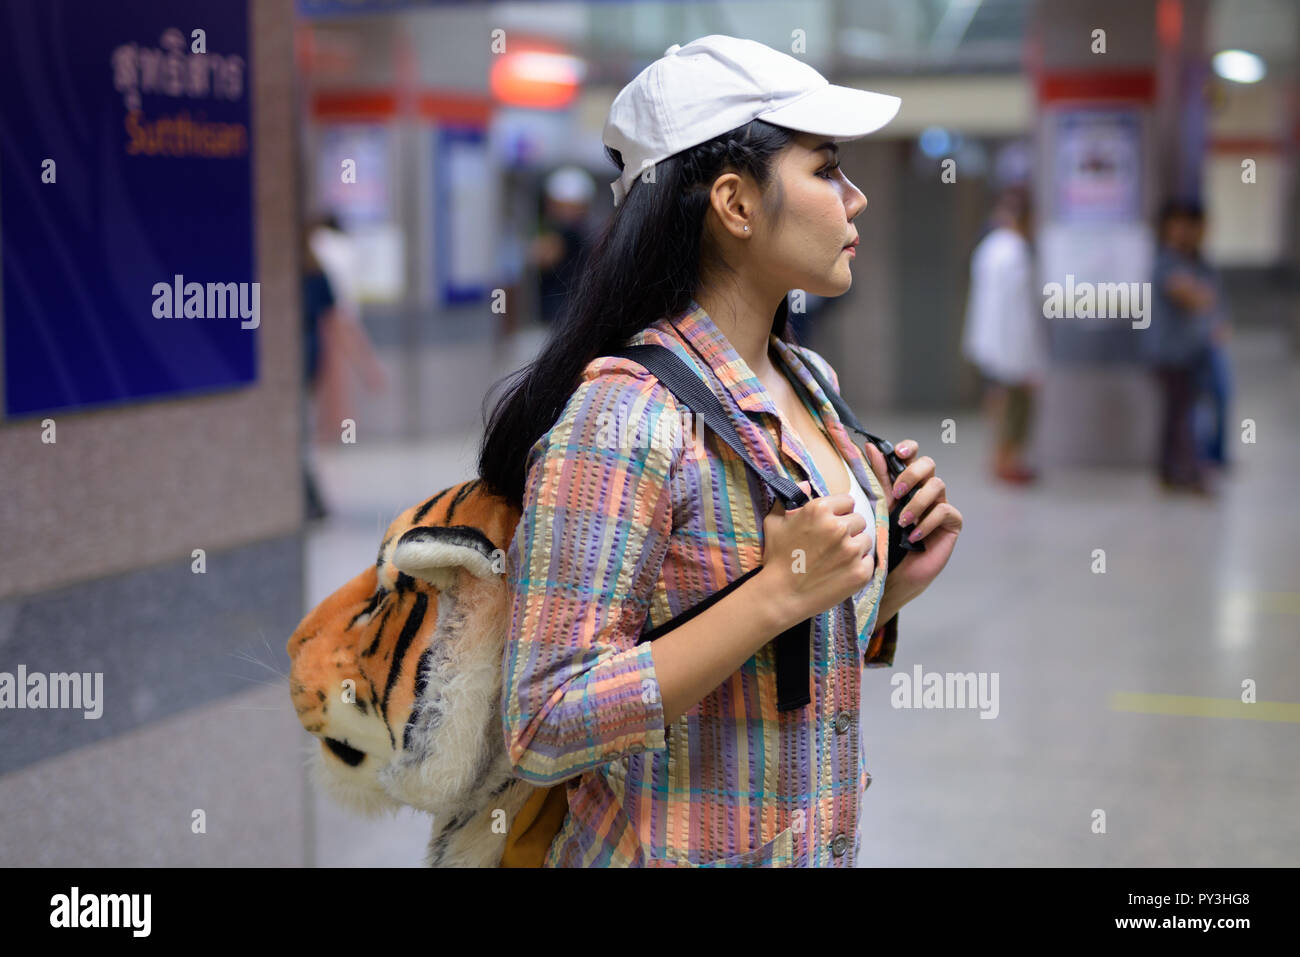 Profile view of Asian woman waiting for train in underground station Stock Photo